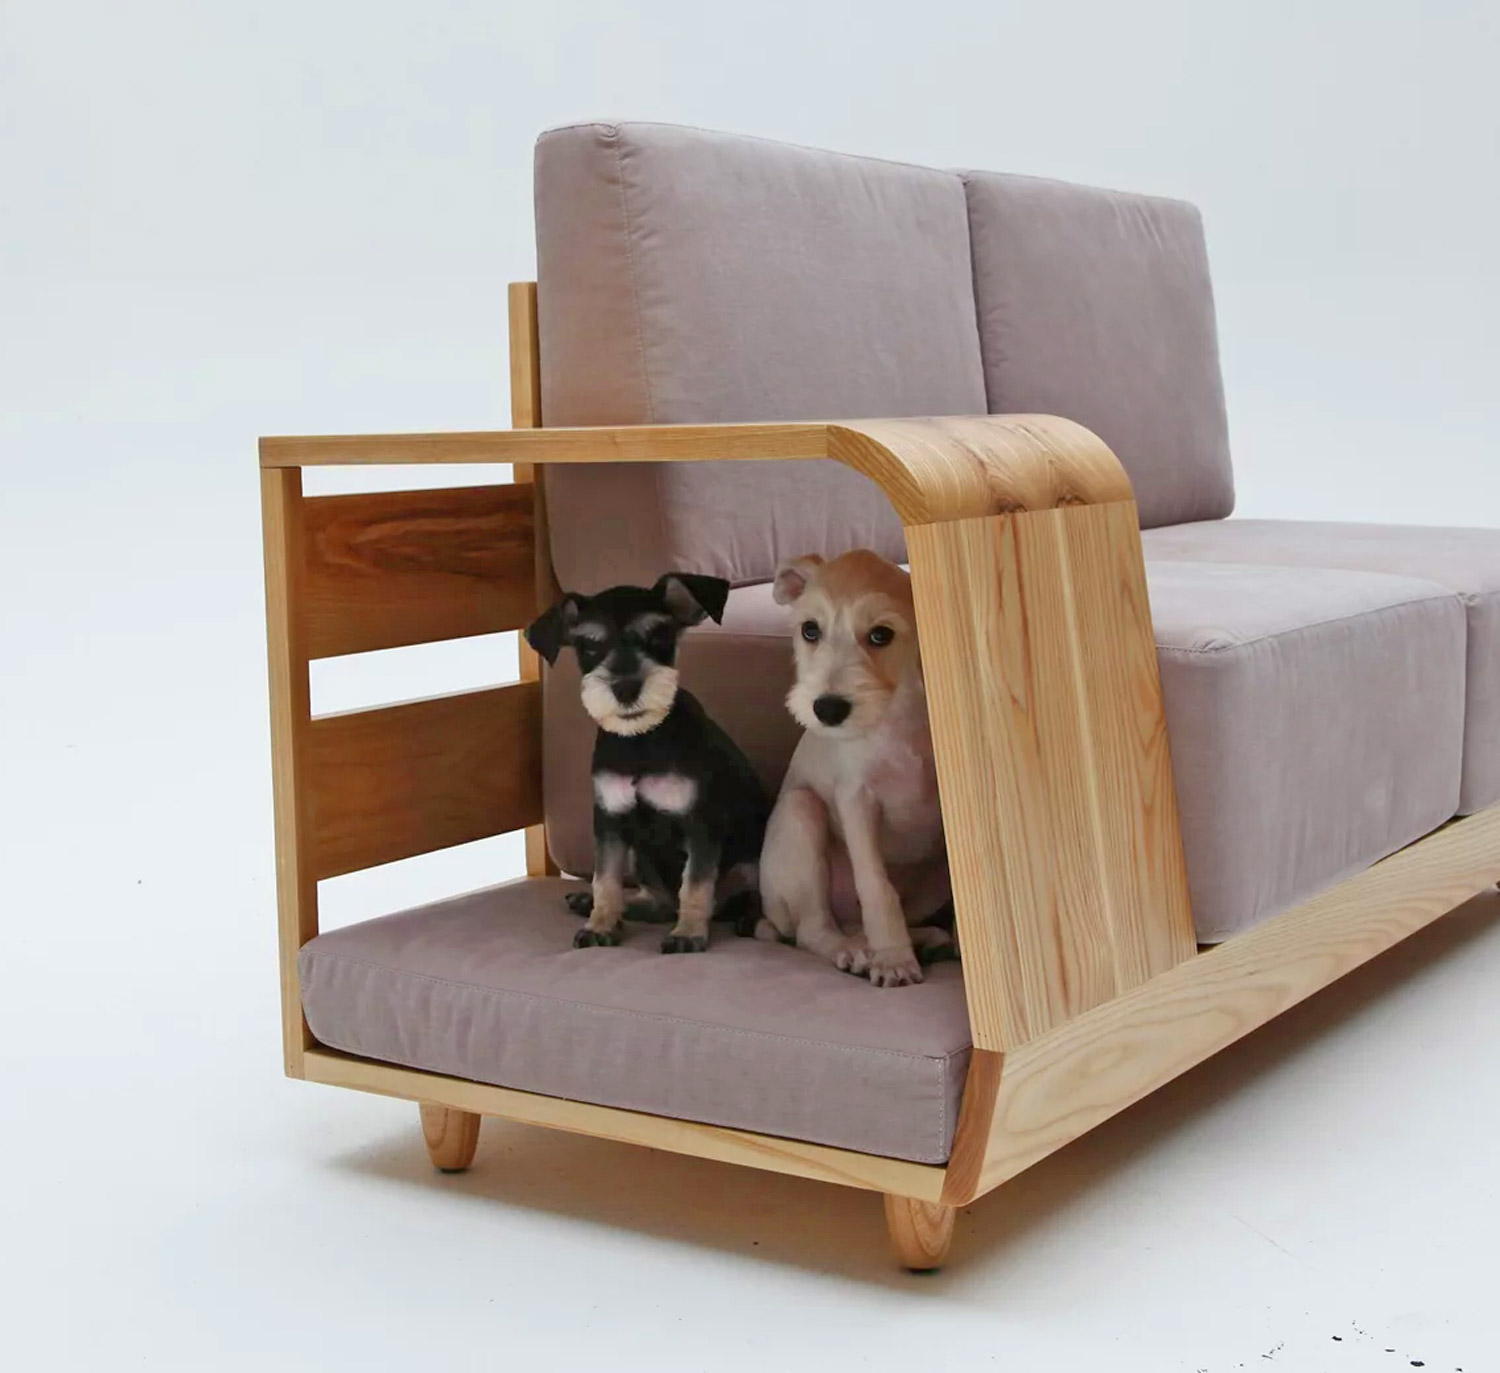 cheap dog couch